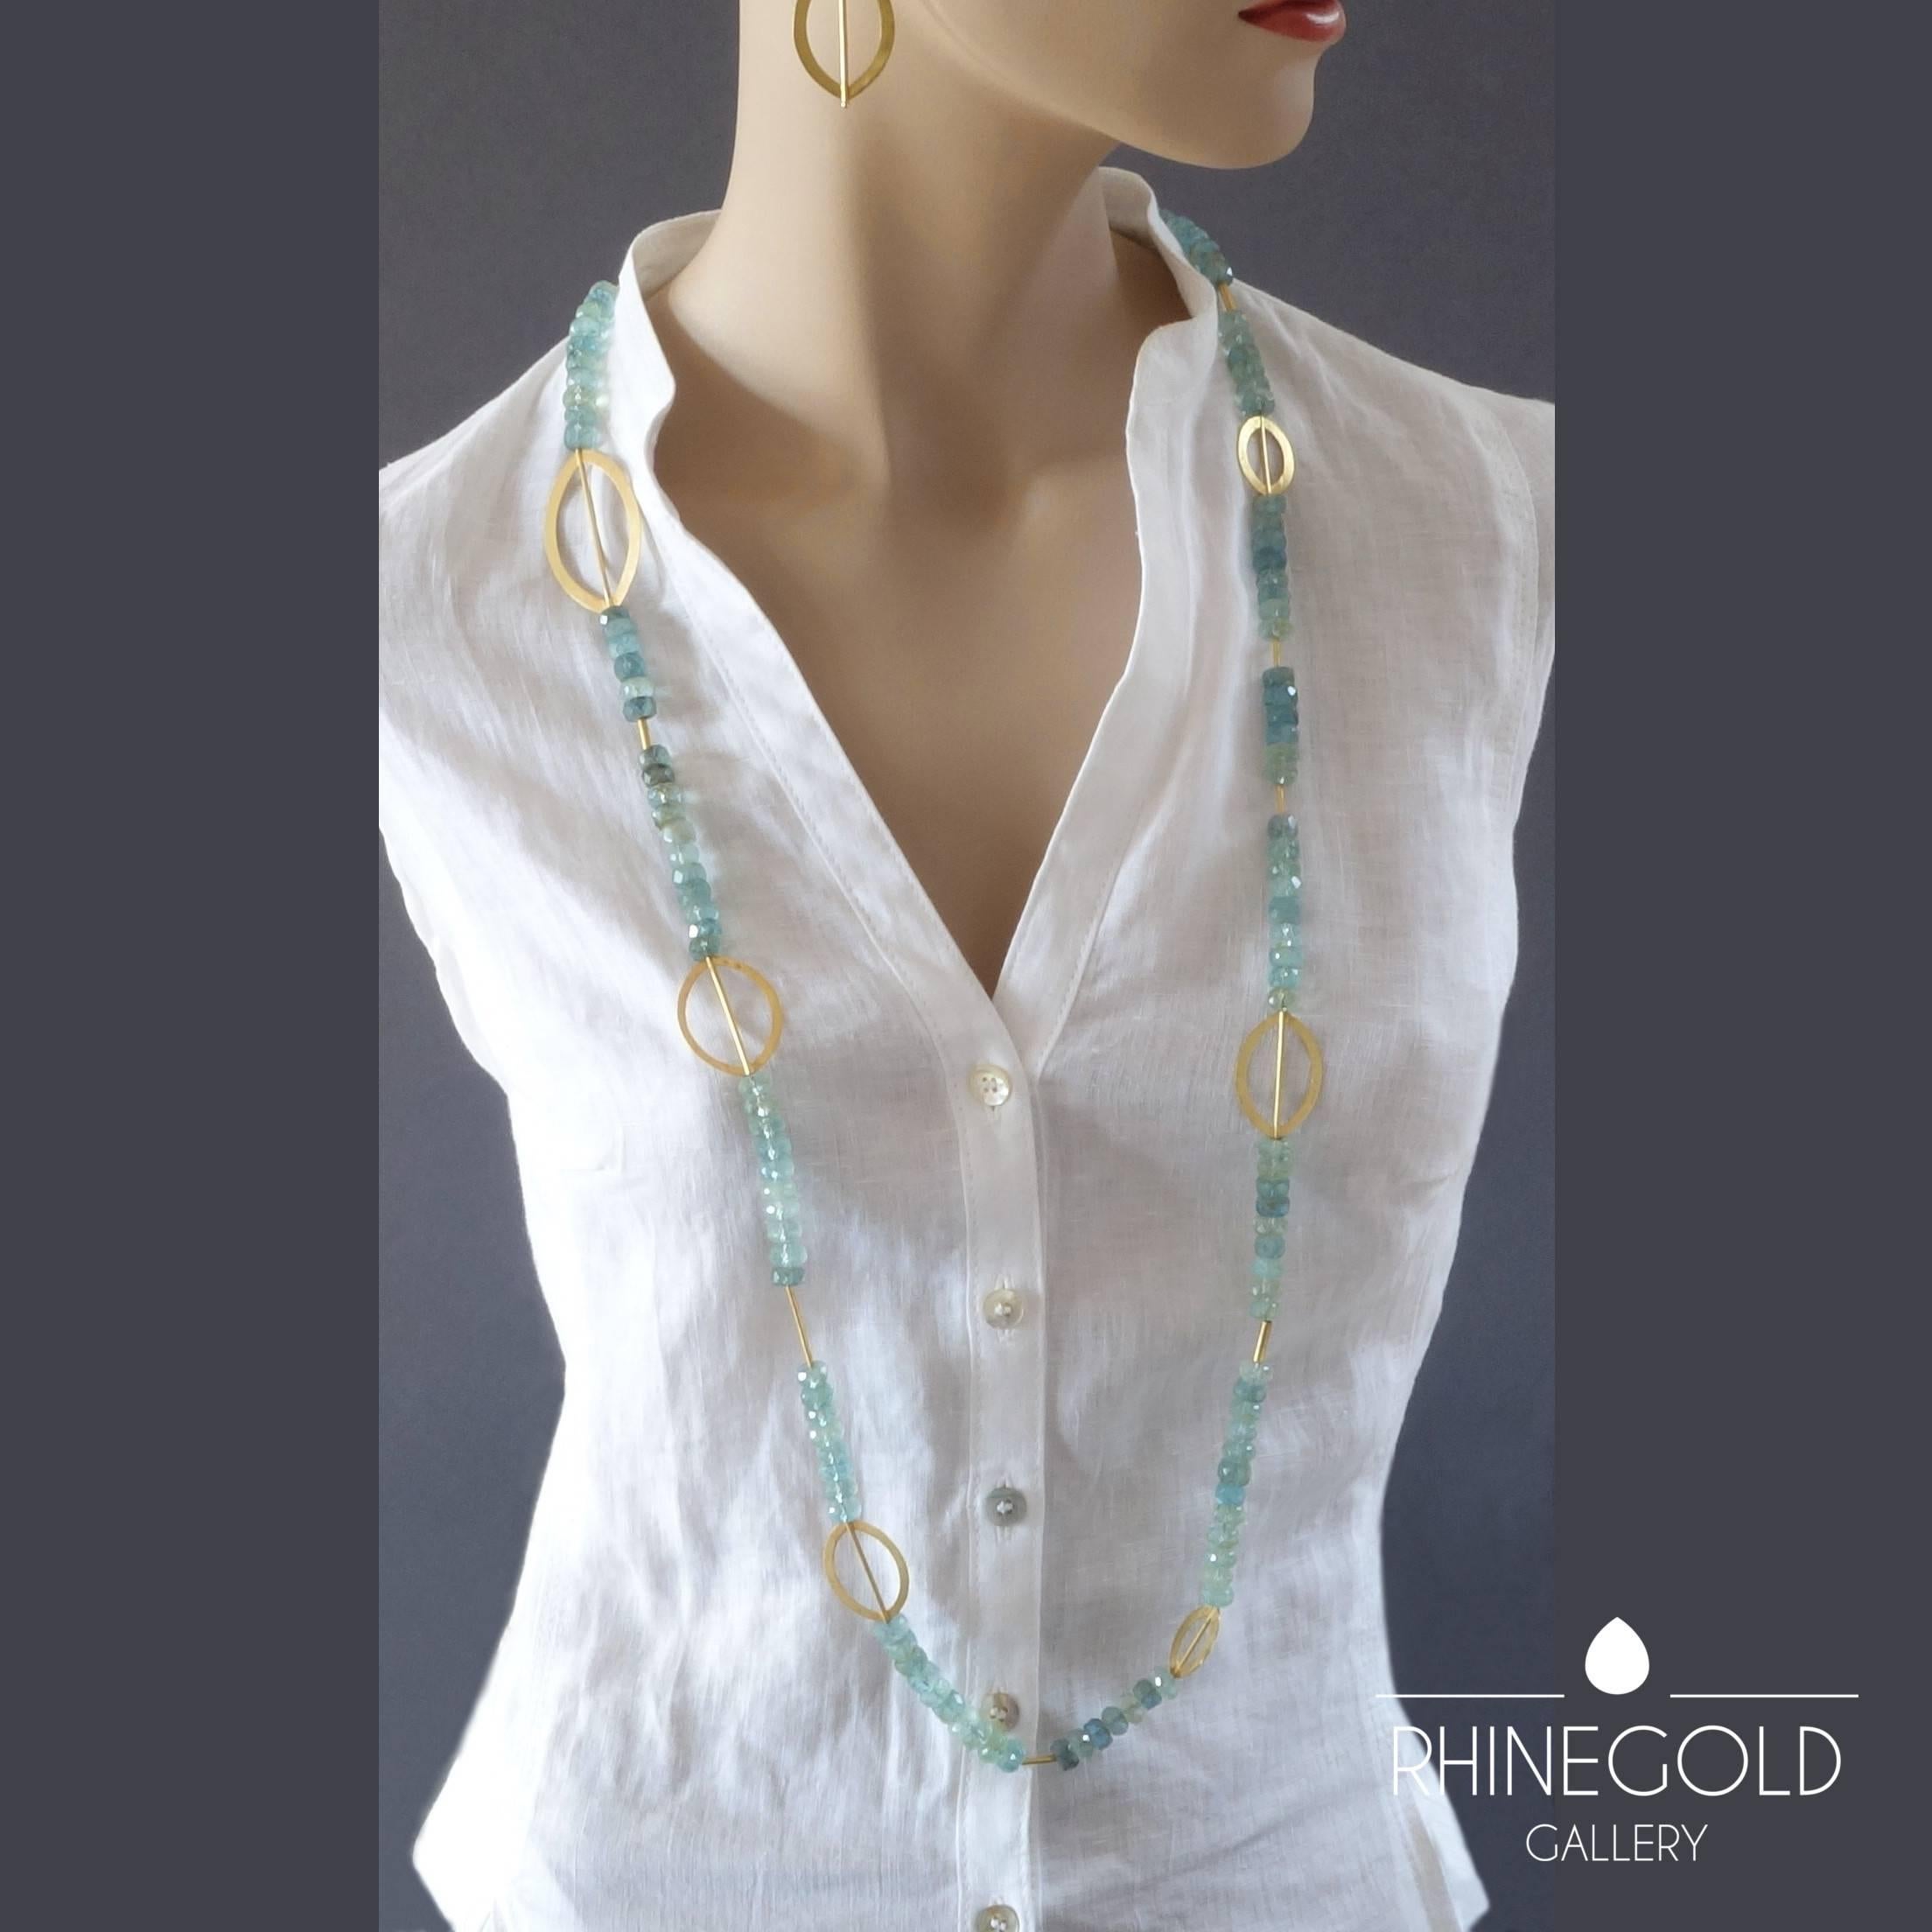 Sabine Strobel Post-Modernist Aquamarine Gold Long Chain Necklace
18k yellow gold, aquamarine
Length 115.5 cm (approx. 45 ½”), width (max.) 3.2 cm (approx. 1 ¼”), aquamarine beads ca. 1.0 cm (approx. 3/8”)
Weight approx. 138.3 grams
Marks: maker’s